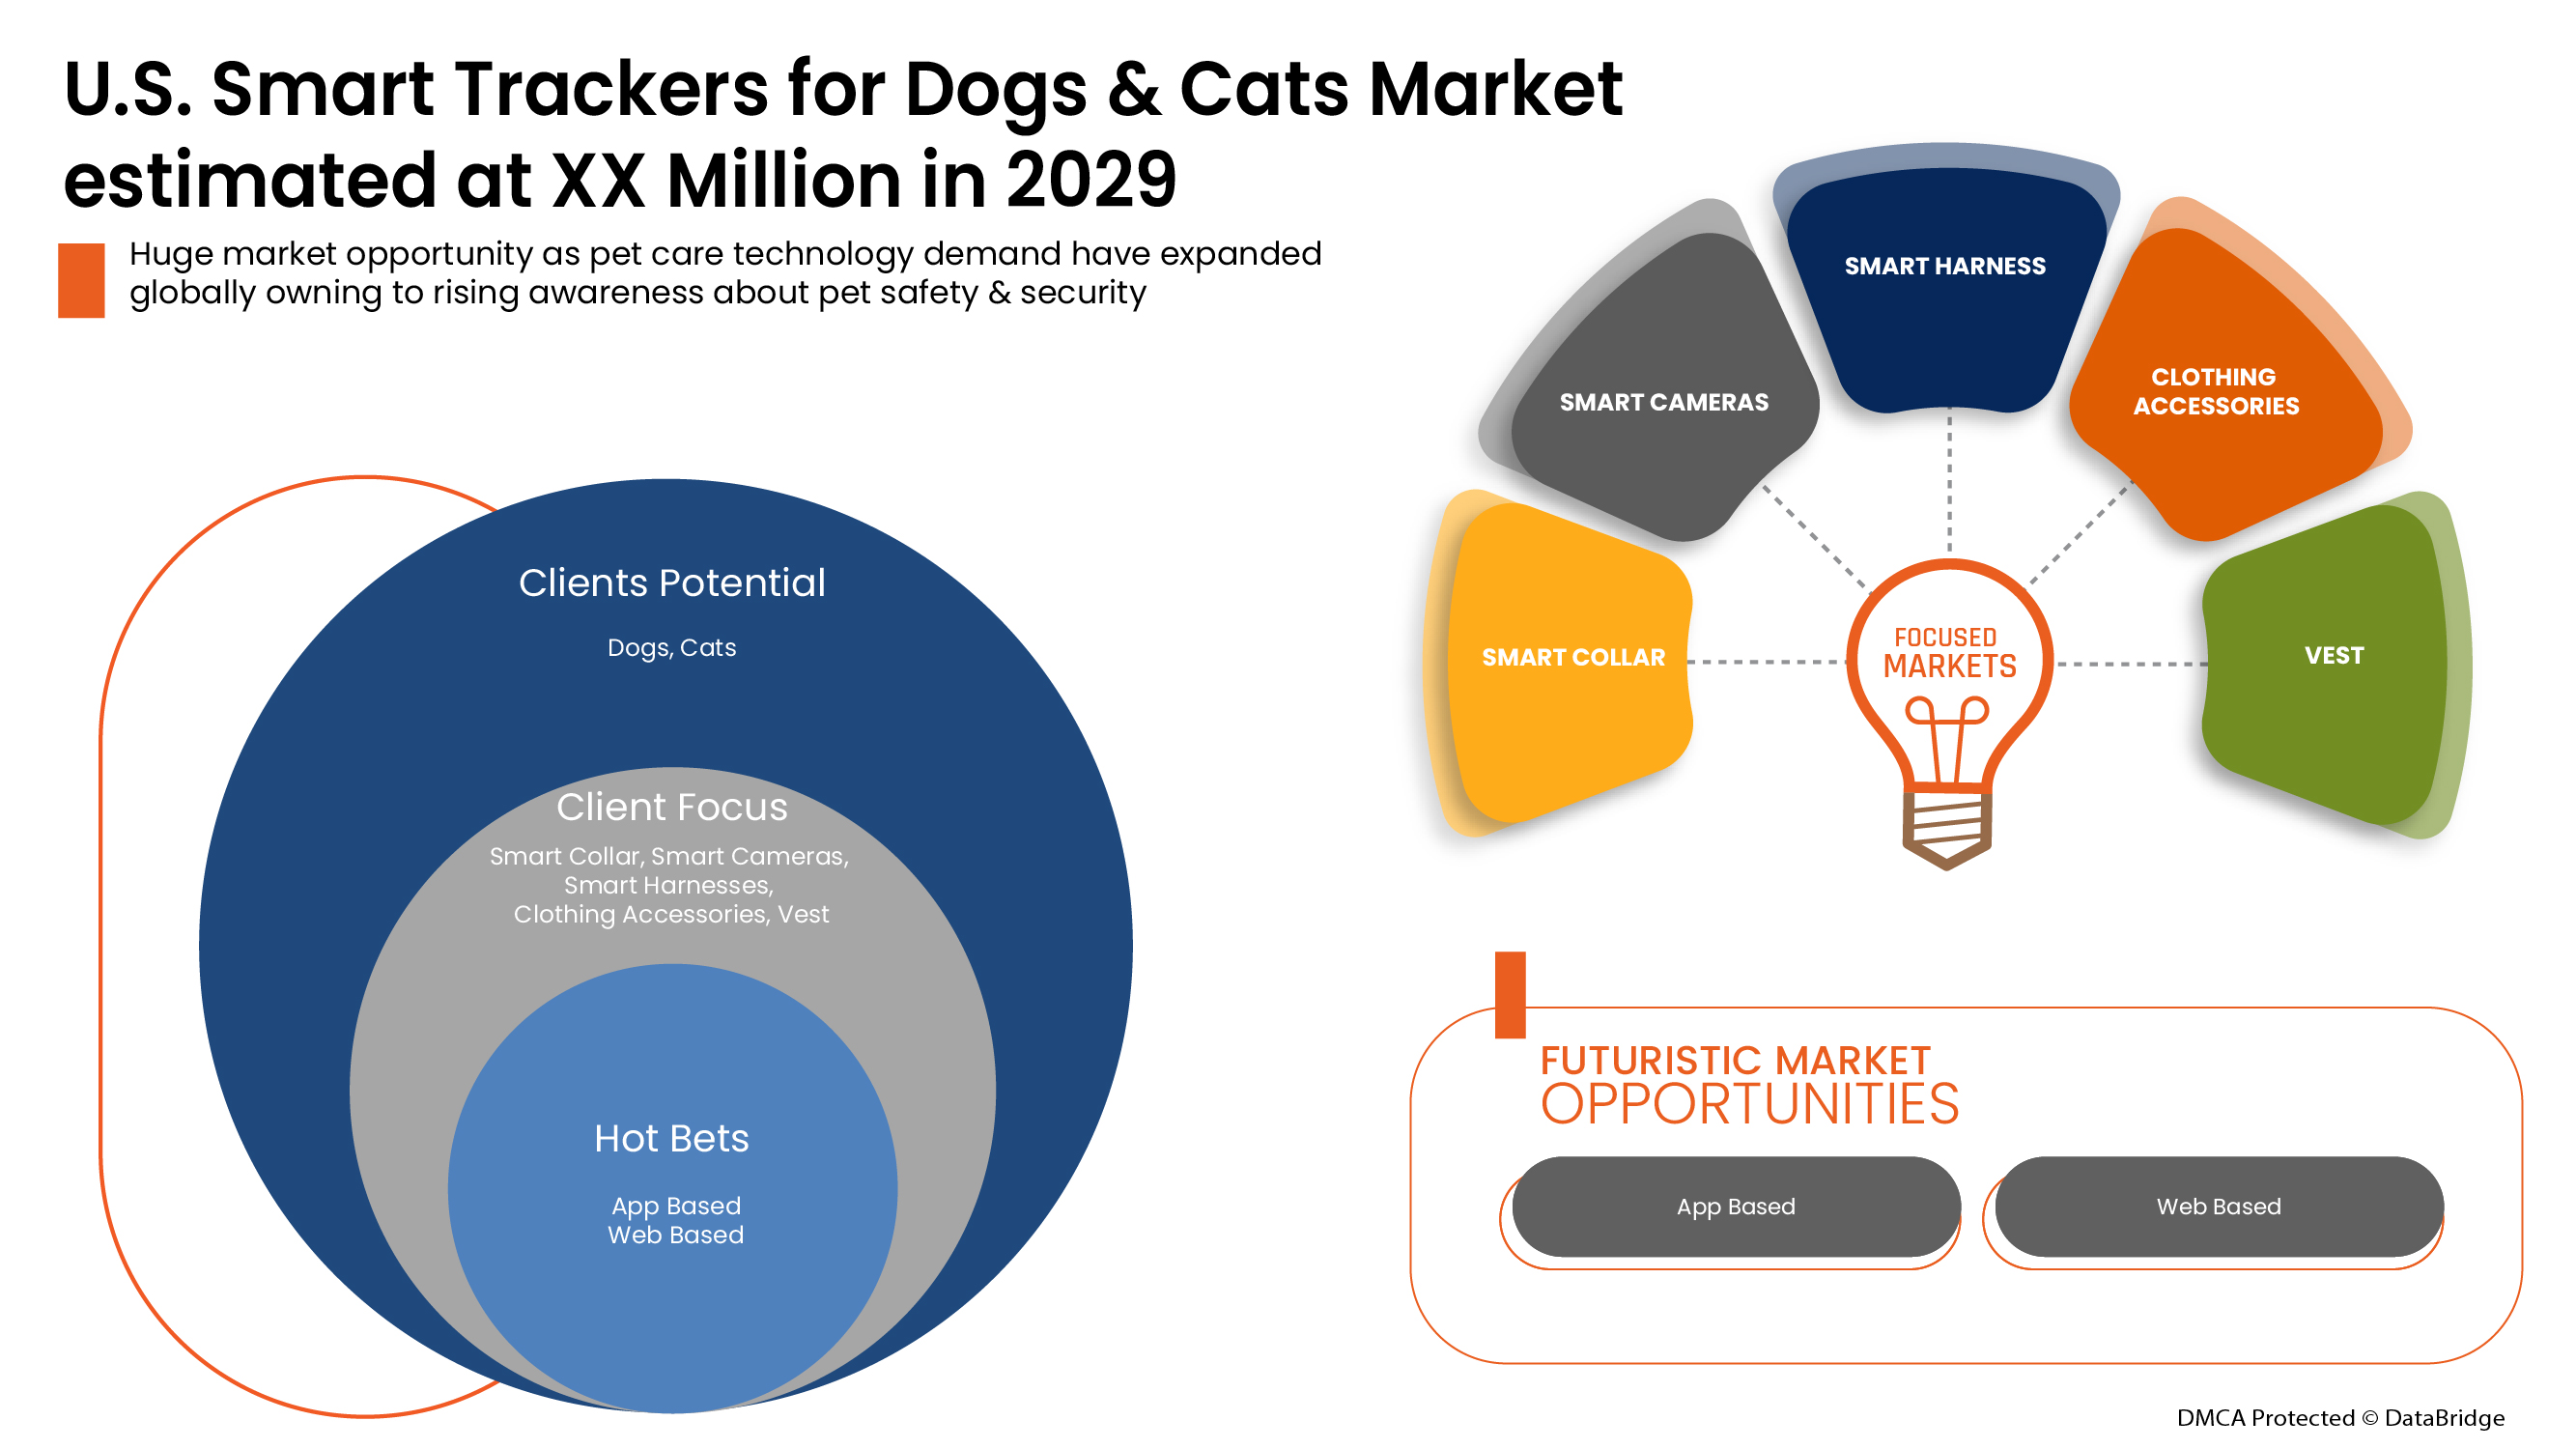 U.S. Smart Trackers for Dogs & Cats Market